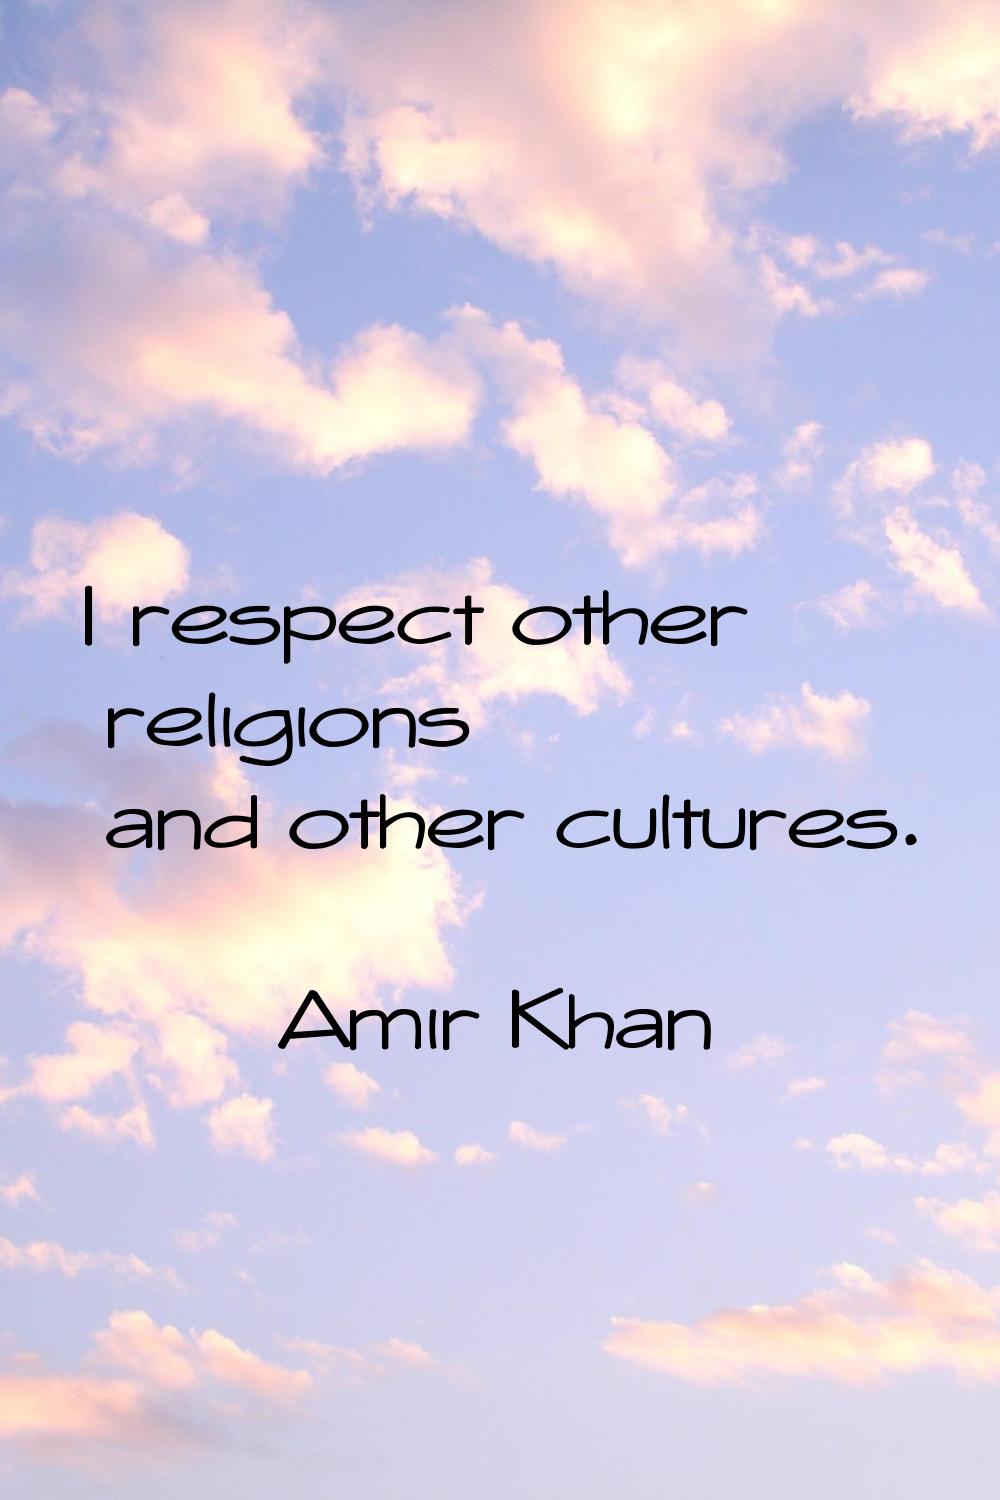 I respect other religions and other cultures.